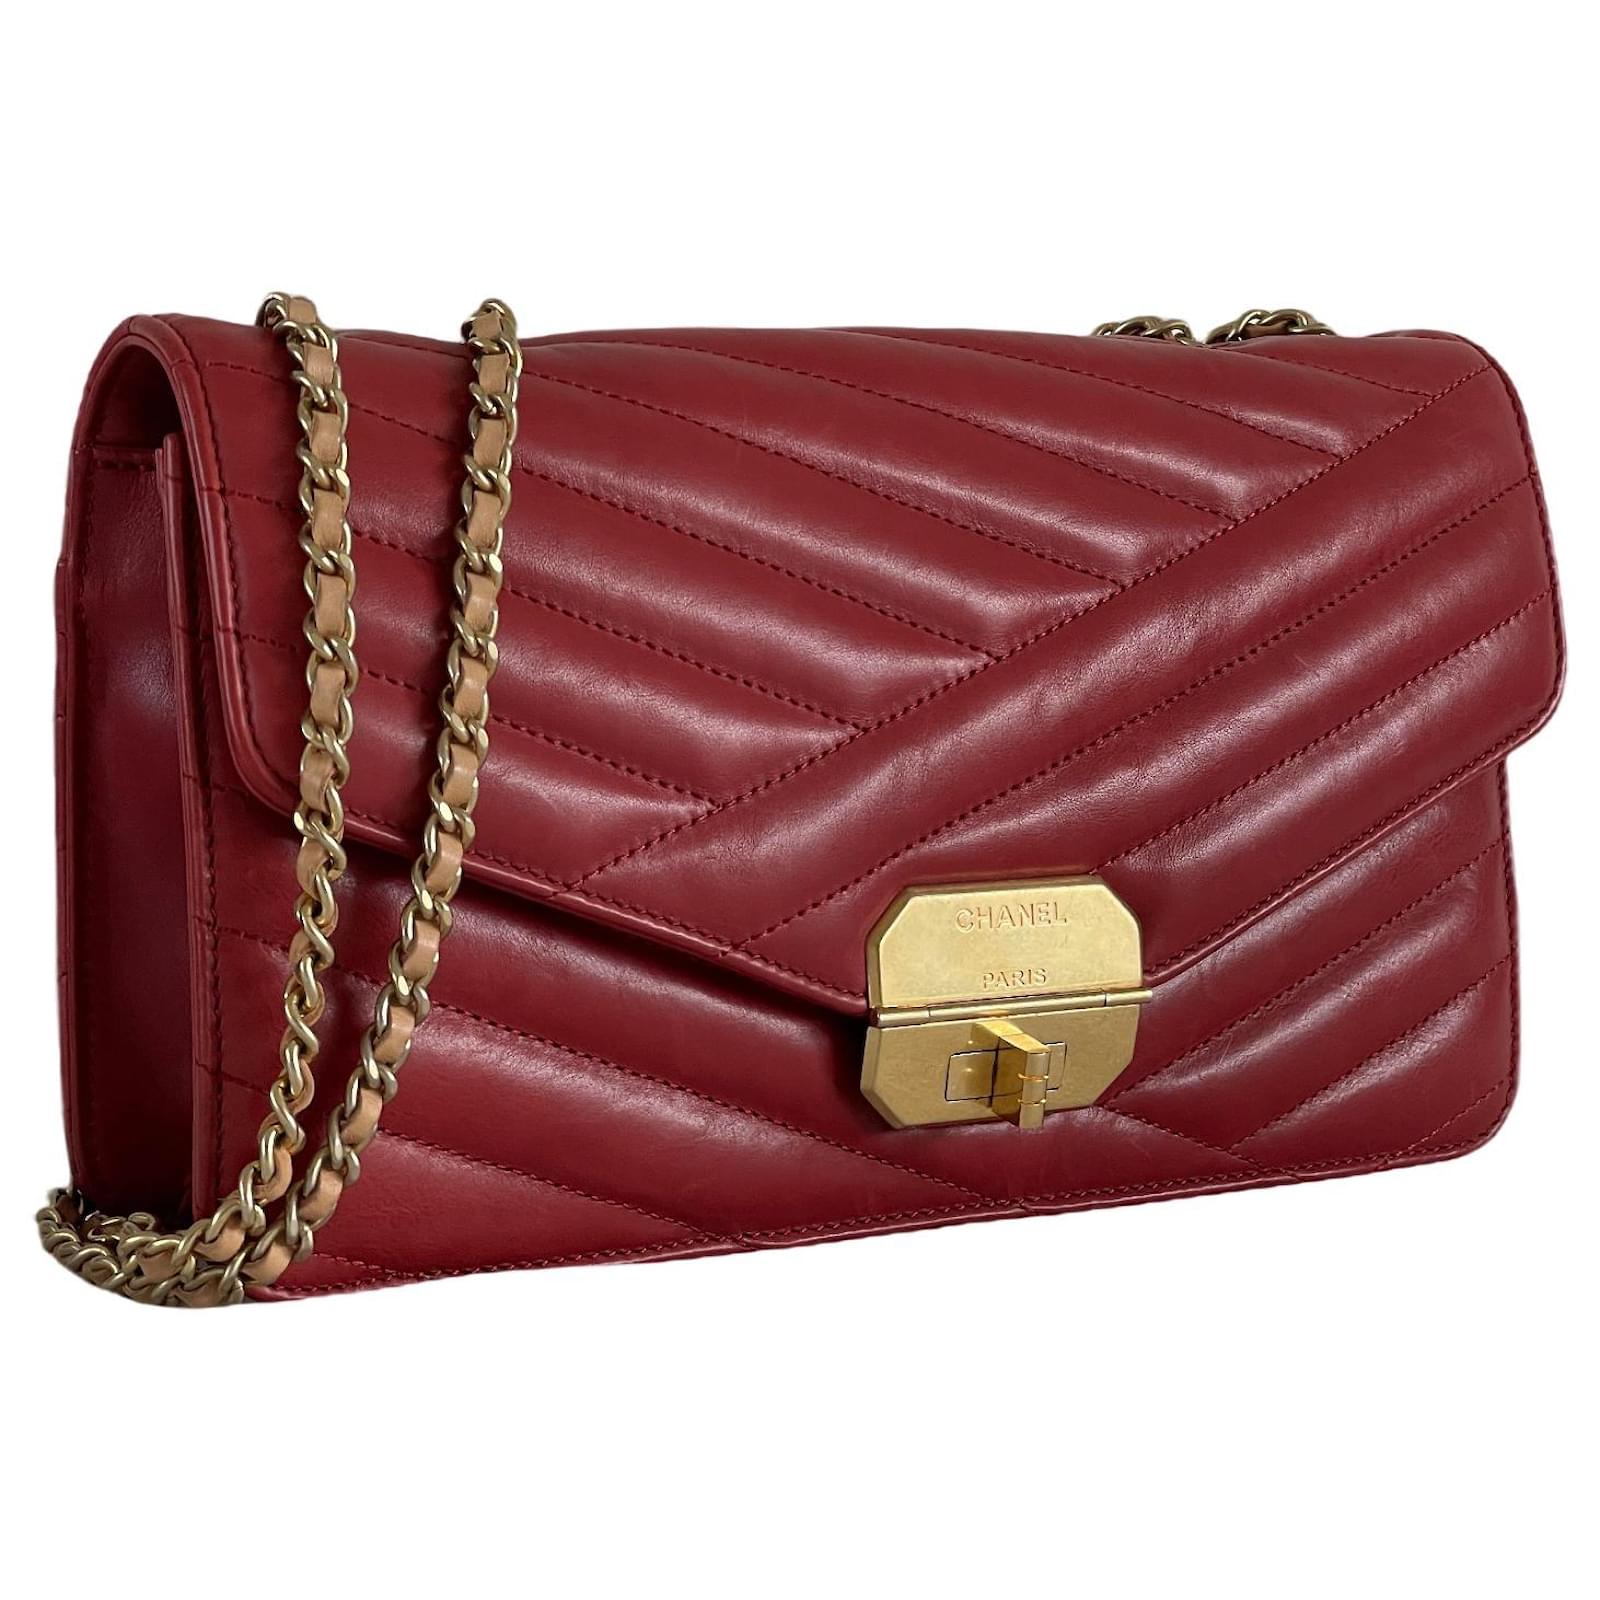 Chanel - Authenticated Gabrielle Handbag - Leather Red Plain for Women, Good Condition